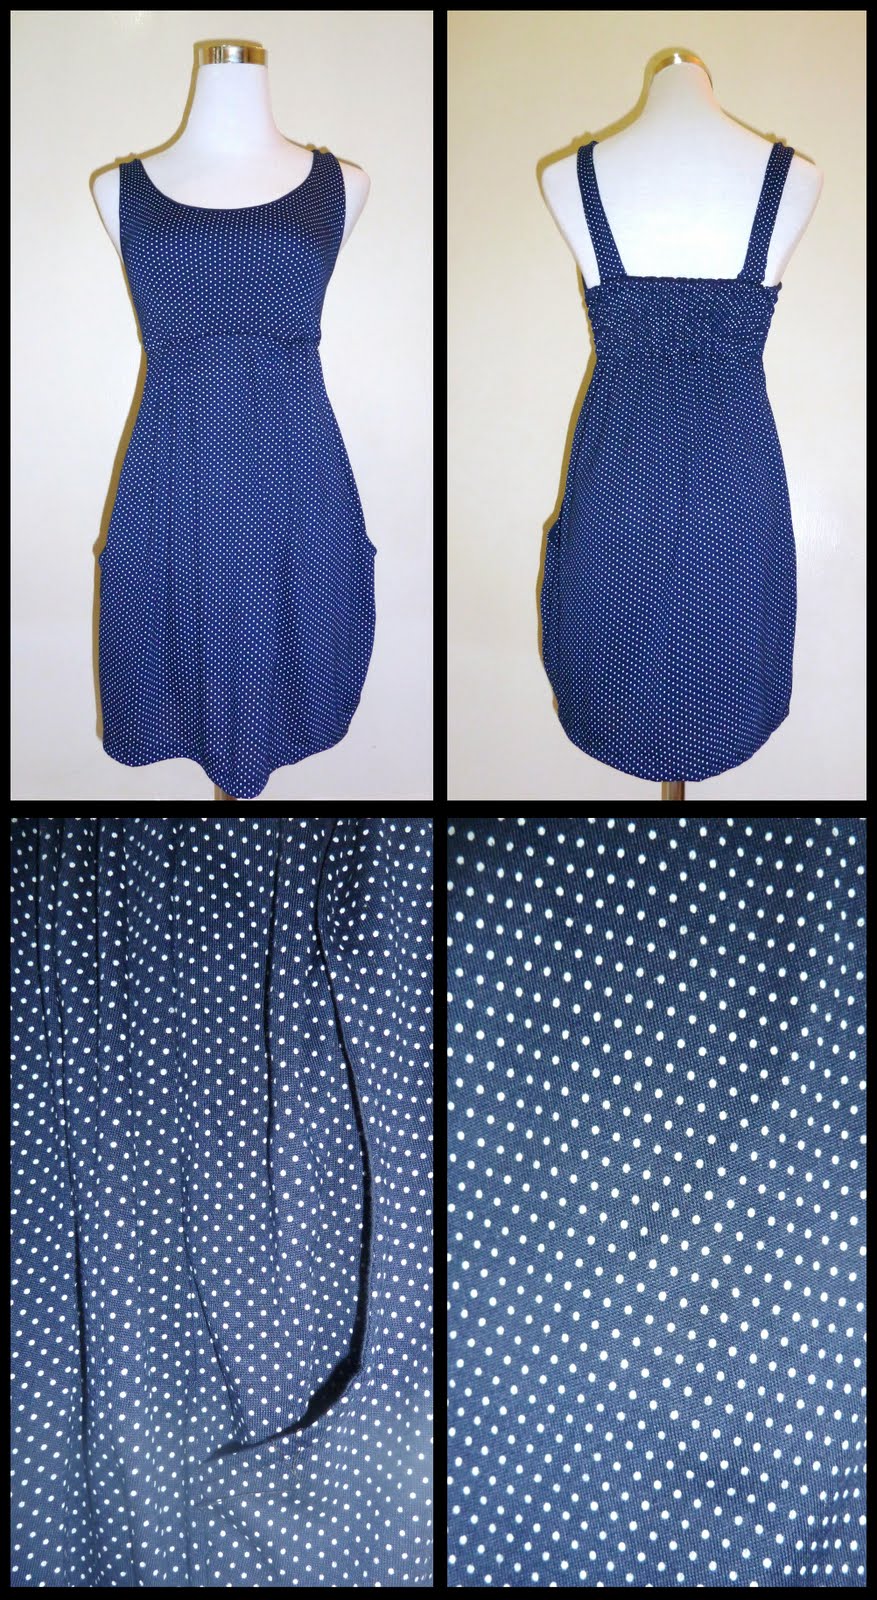 Garb & Garments: Dresses [Ready in Stock]